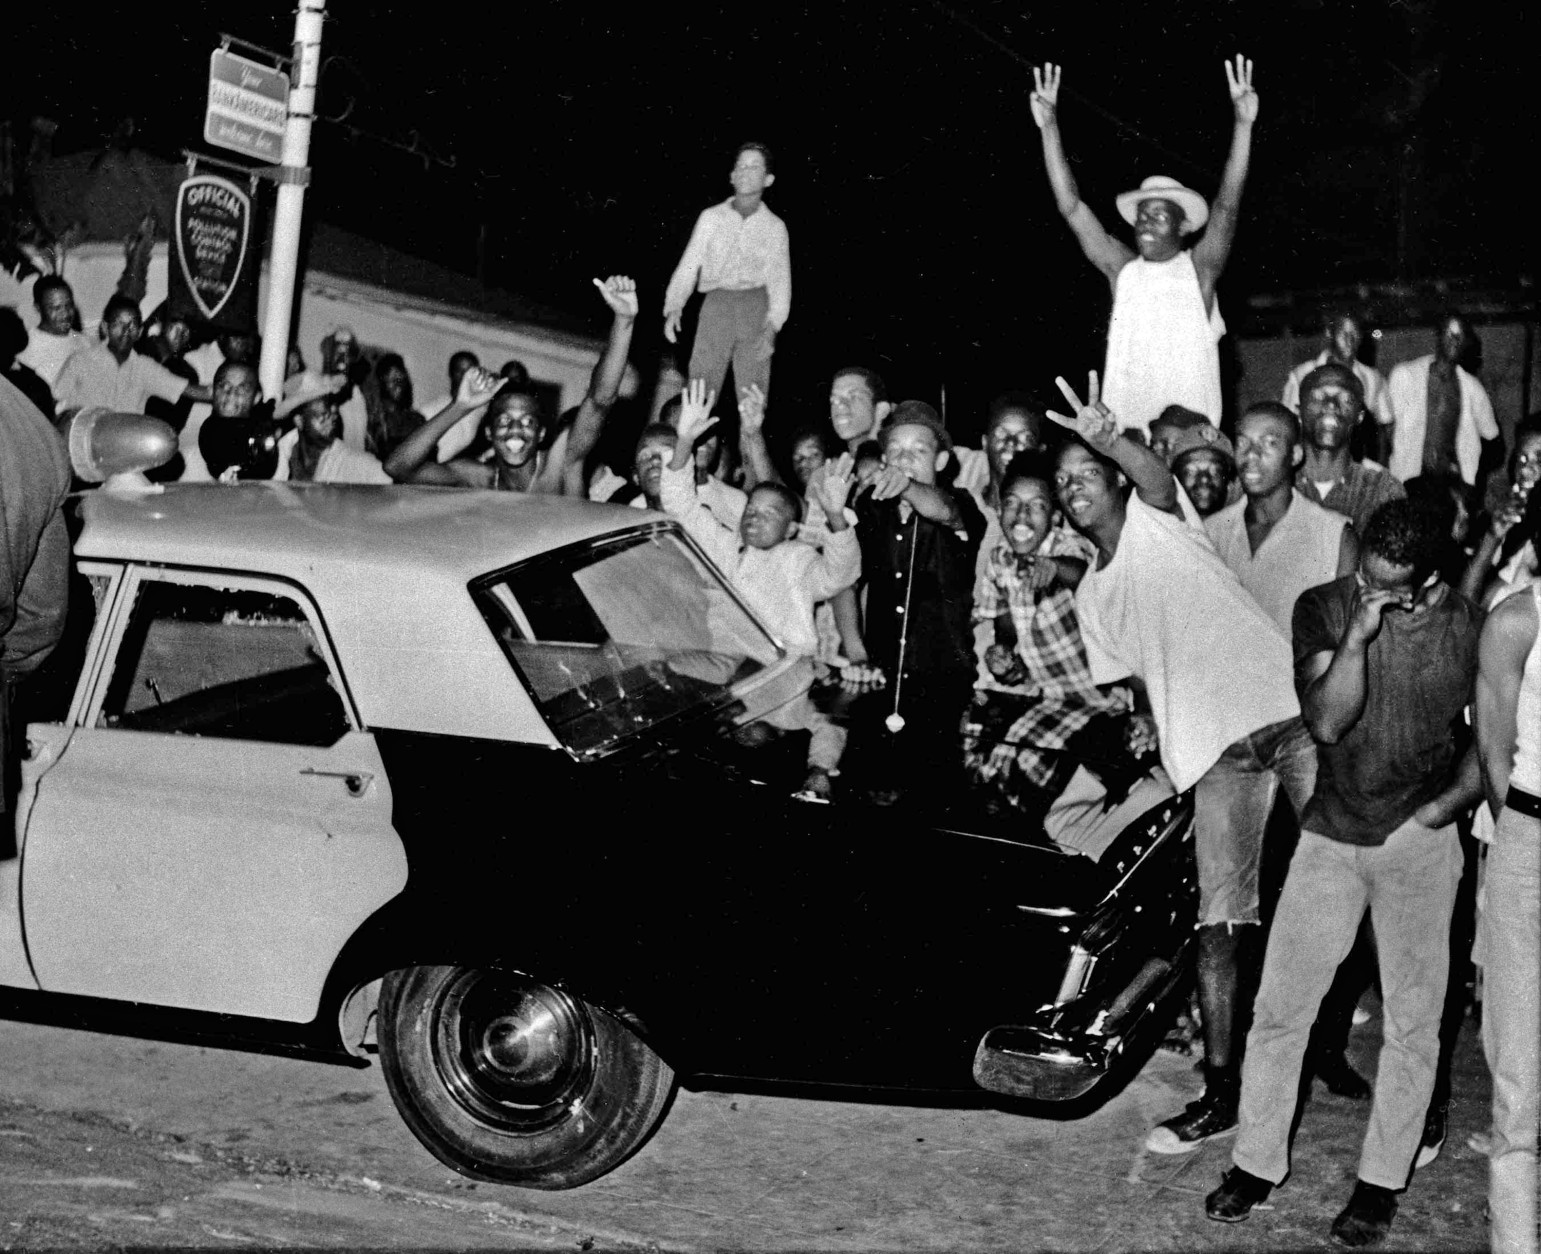 On August 11, 1965, rioting and looting that claimed 34 lives broke out in the predominantly black Watts section of Los Angeles. (AP Photo, File)